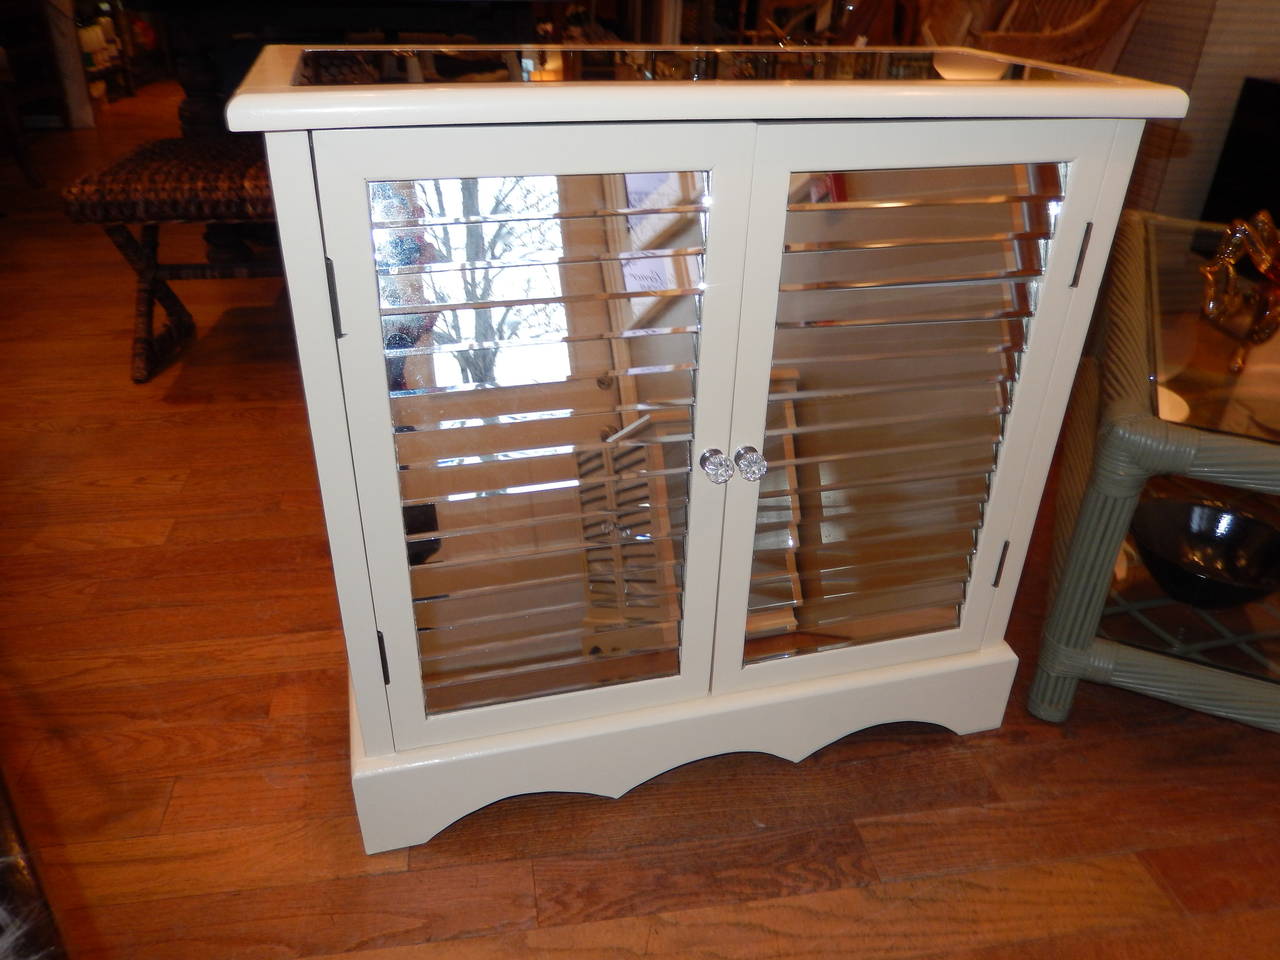 Pair of attractive painted (creamy ivory) mirrored side cabinets or cupboards with louvered doors.
The louvers are fixed so they will not move. The tops and sides are also mirrored. Doors open to good storage, with one shelf on the middle left.